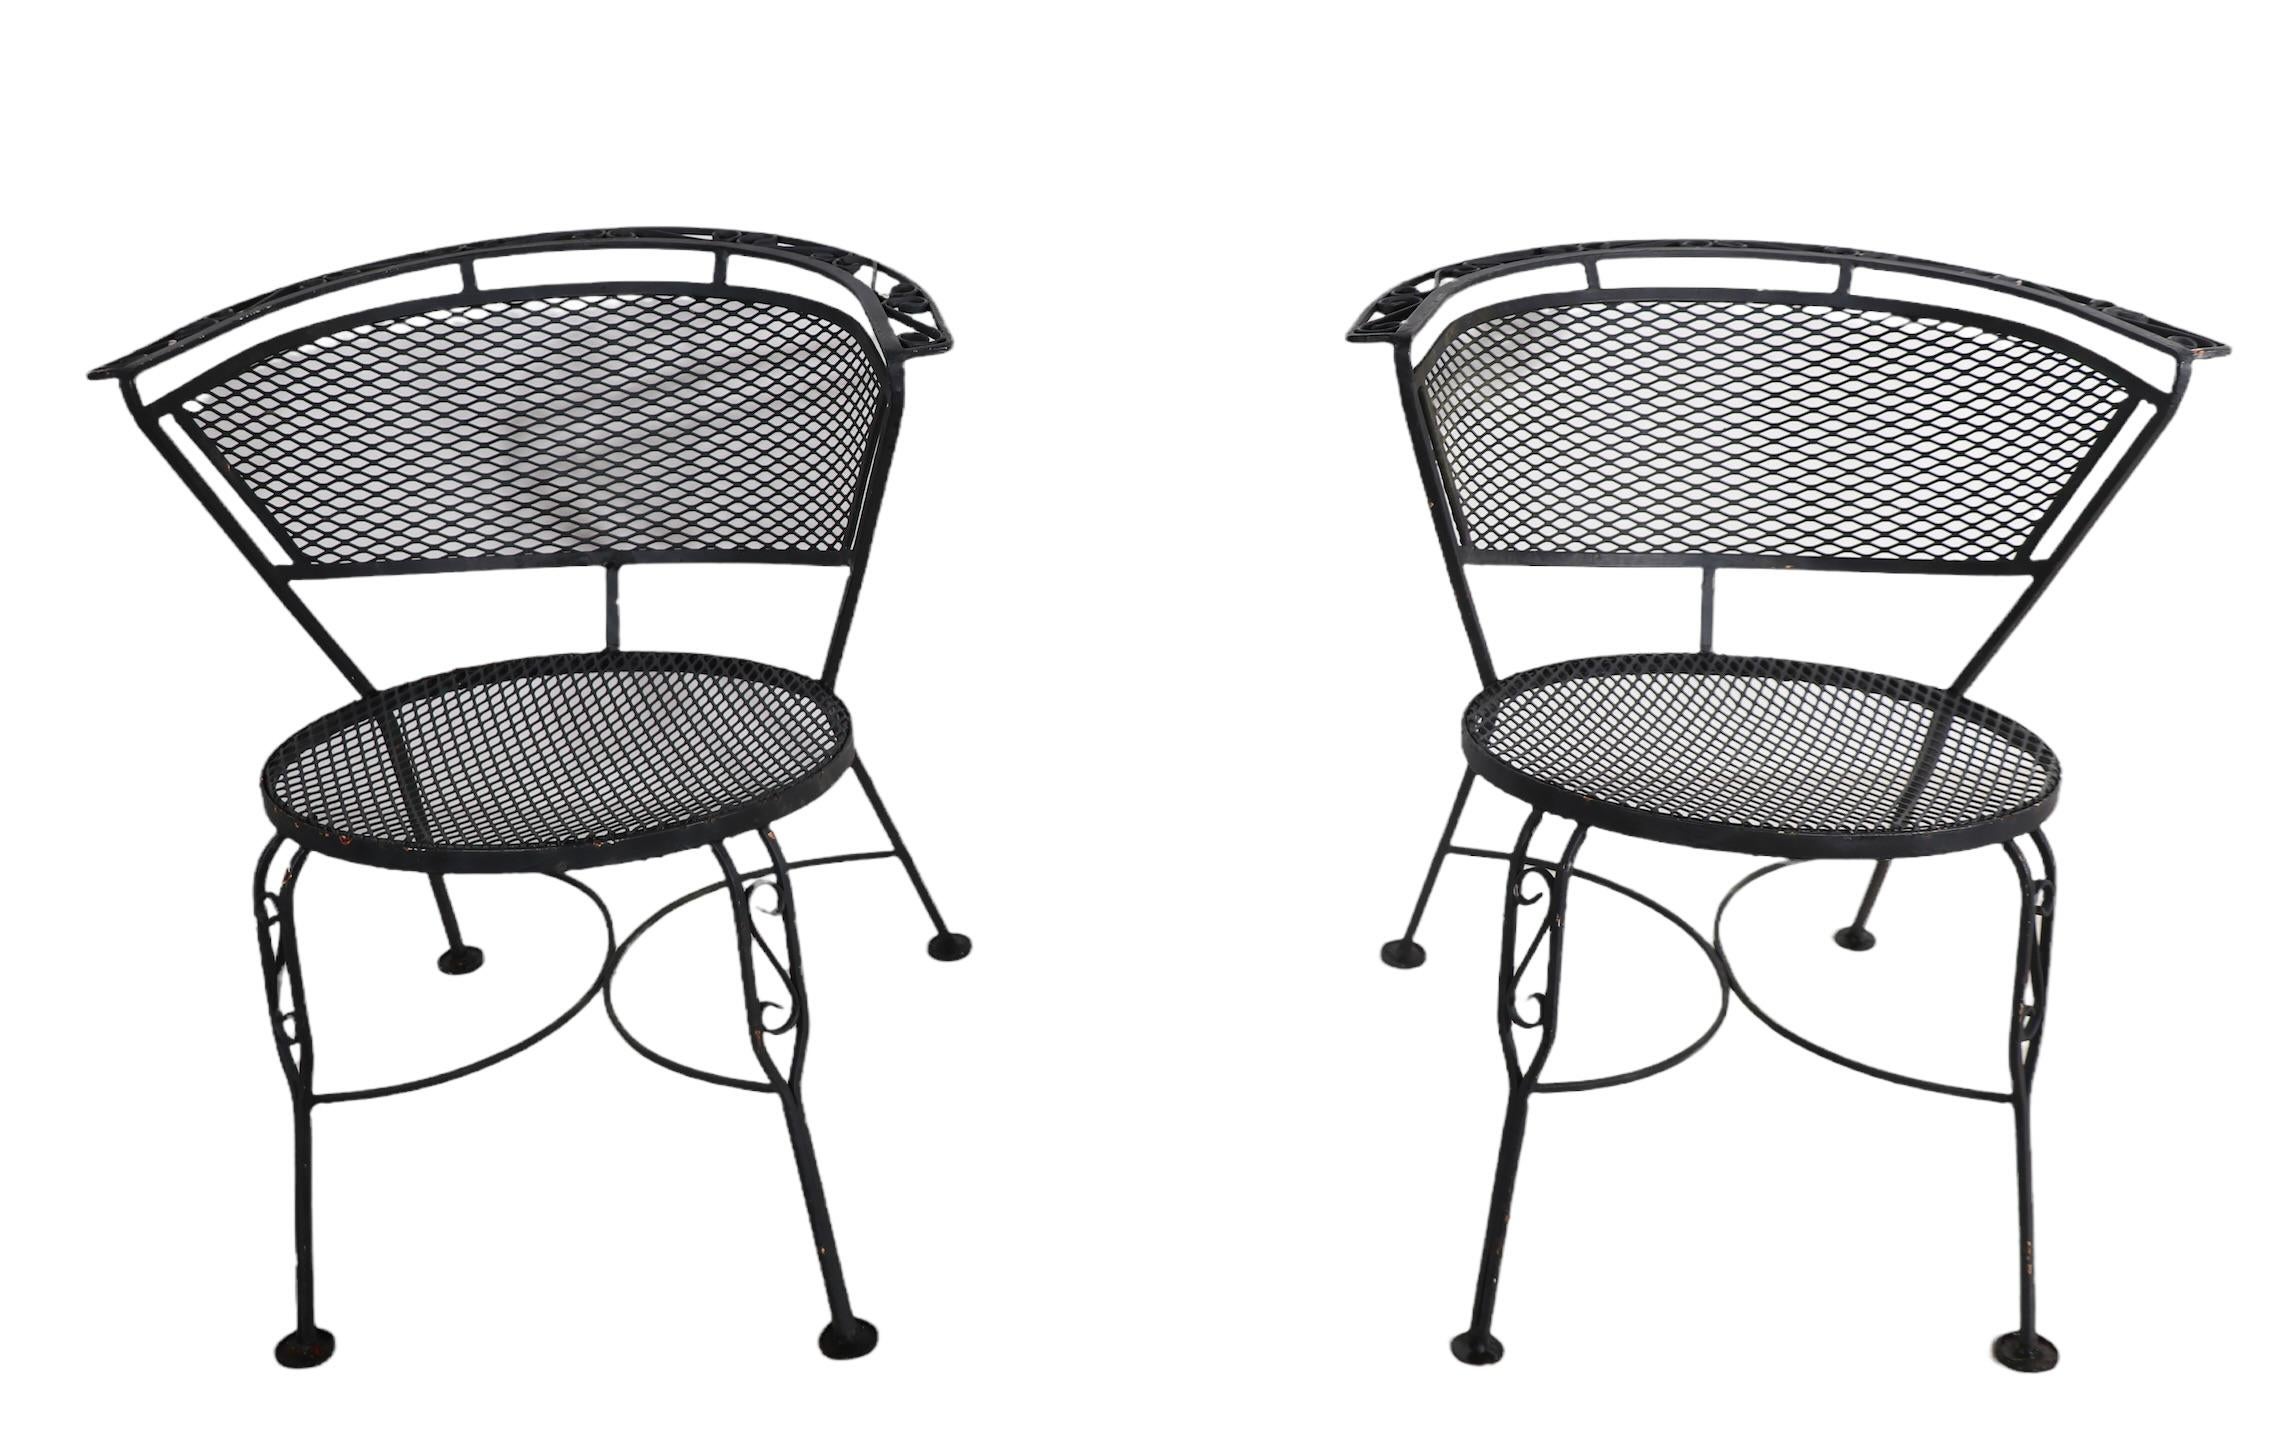 Pr. Decorative Garden Patio Poolside Wrought Iron Chairs by Woodard For Sale 4